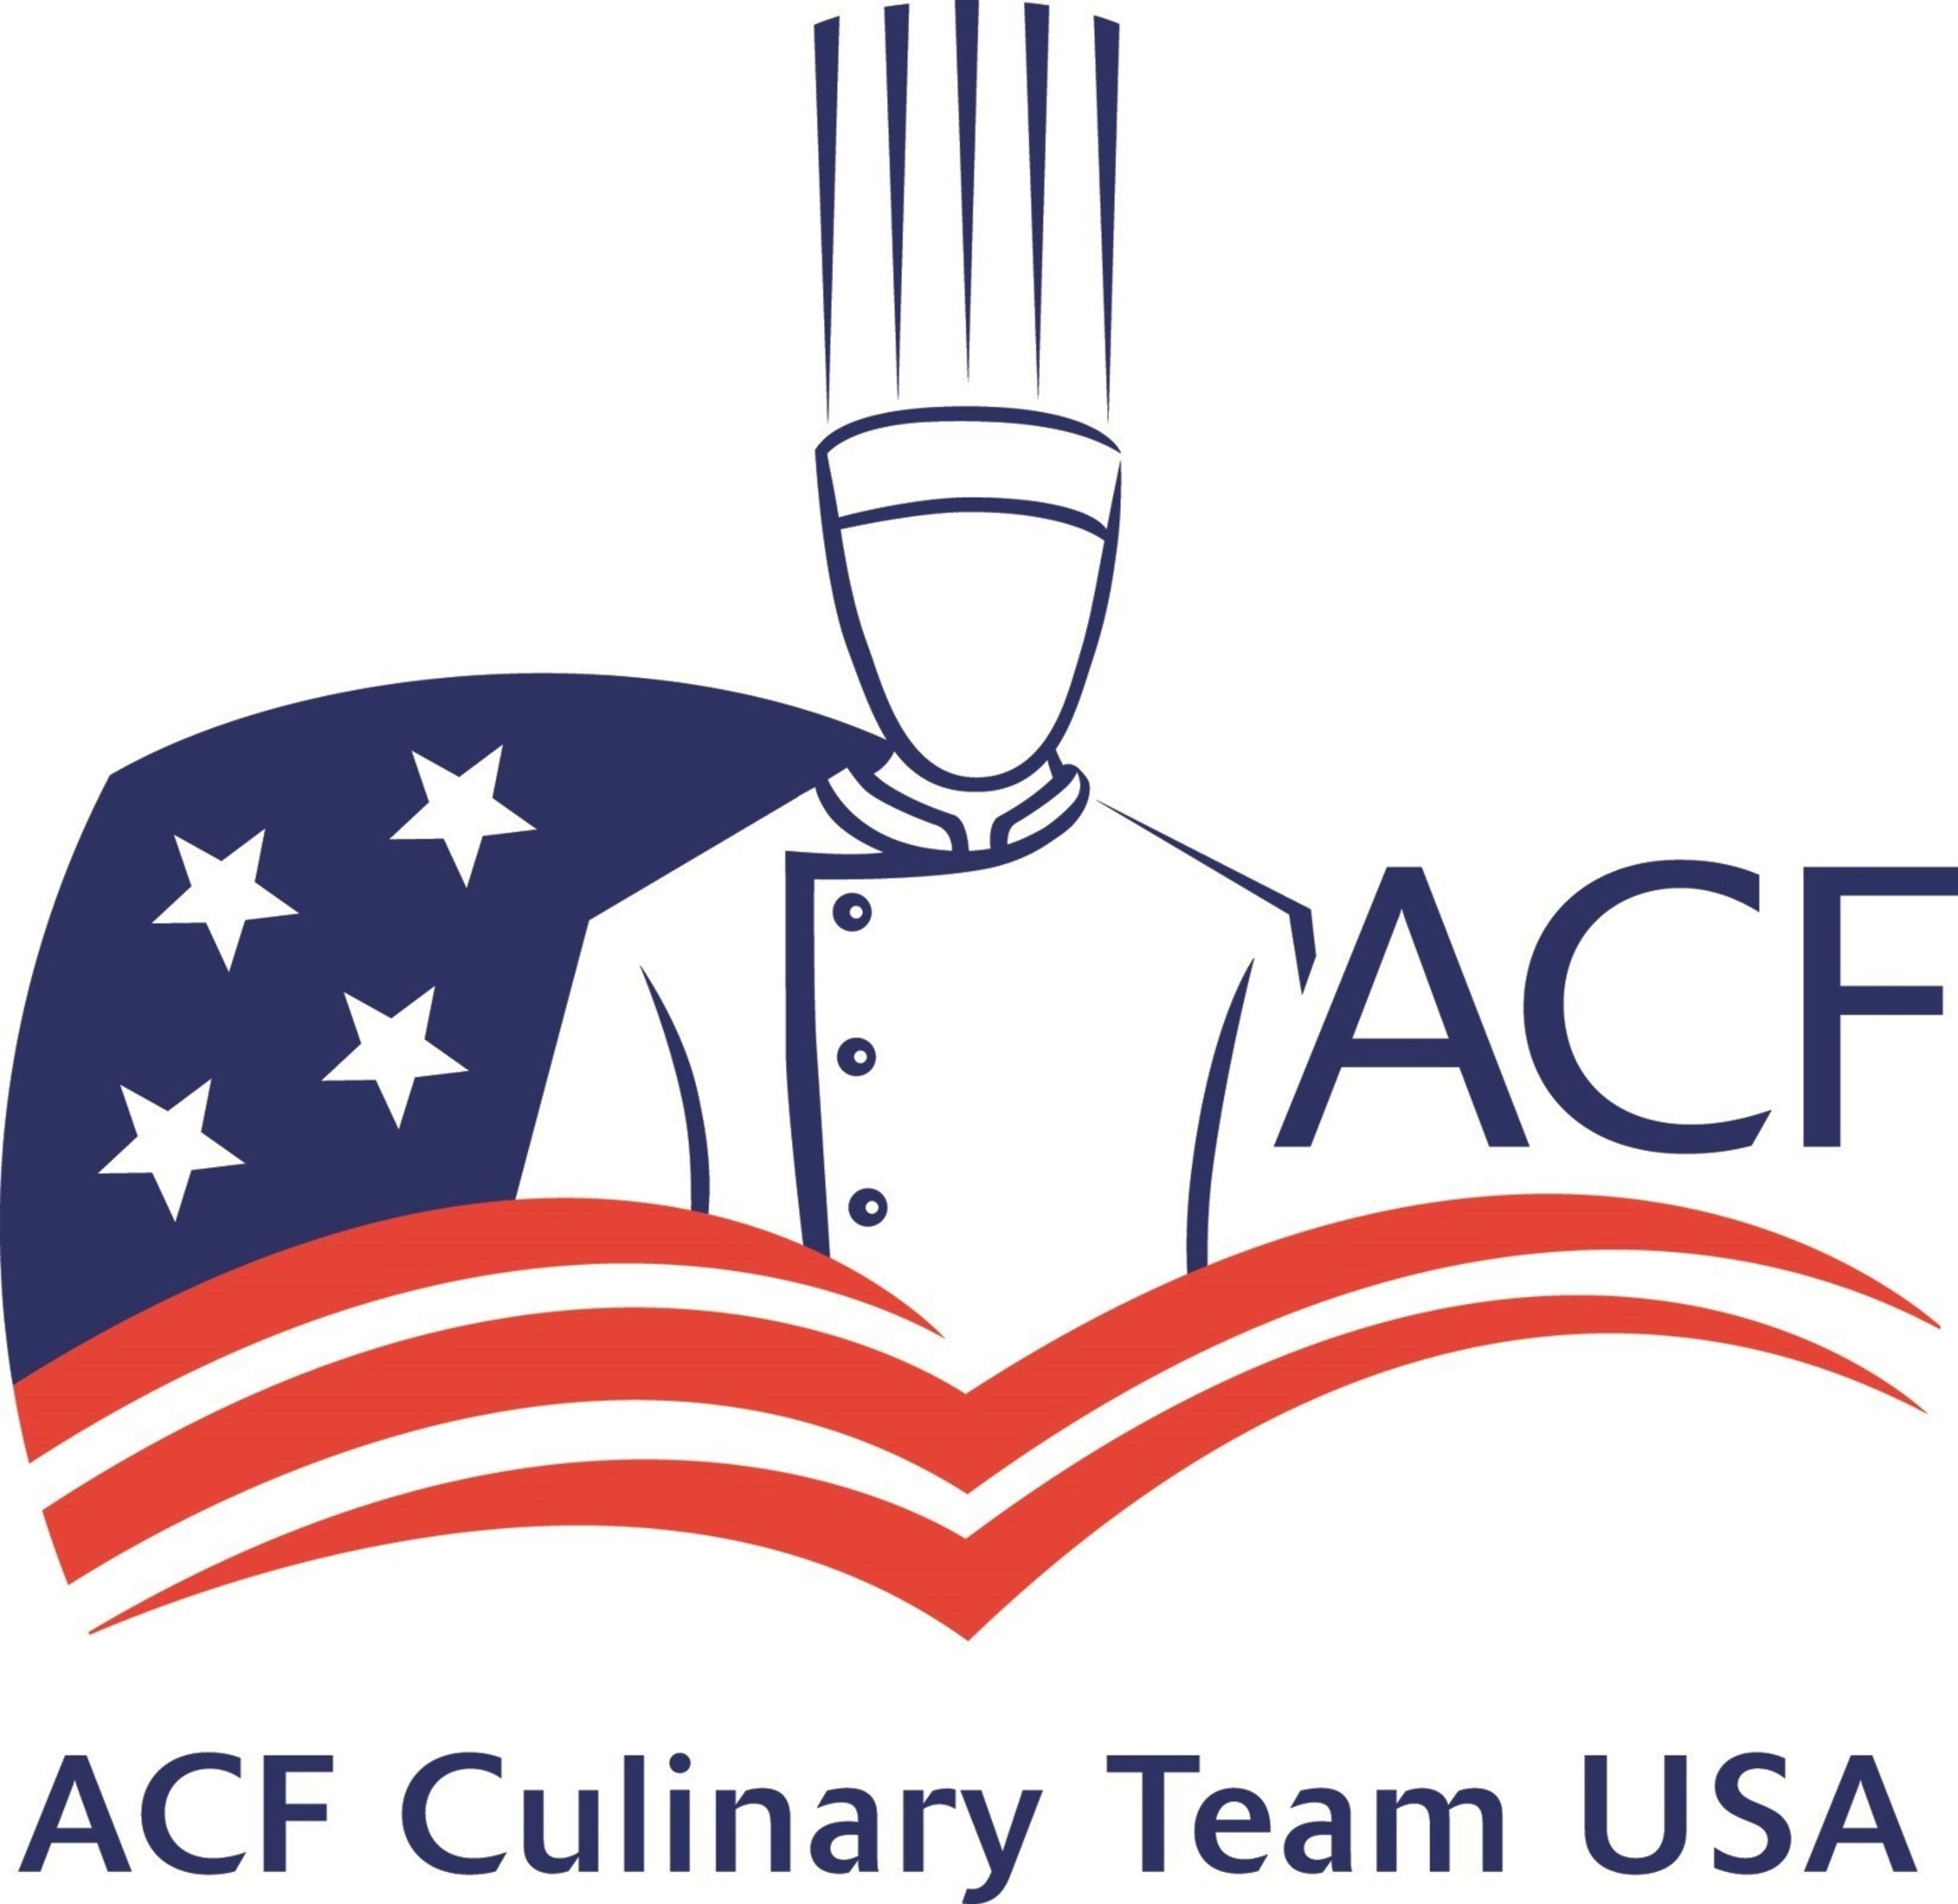 ACF Culinary Team USA is the official representative for the United States in major international culinary competitions.